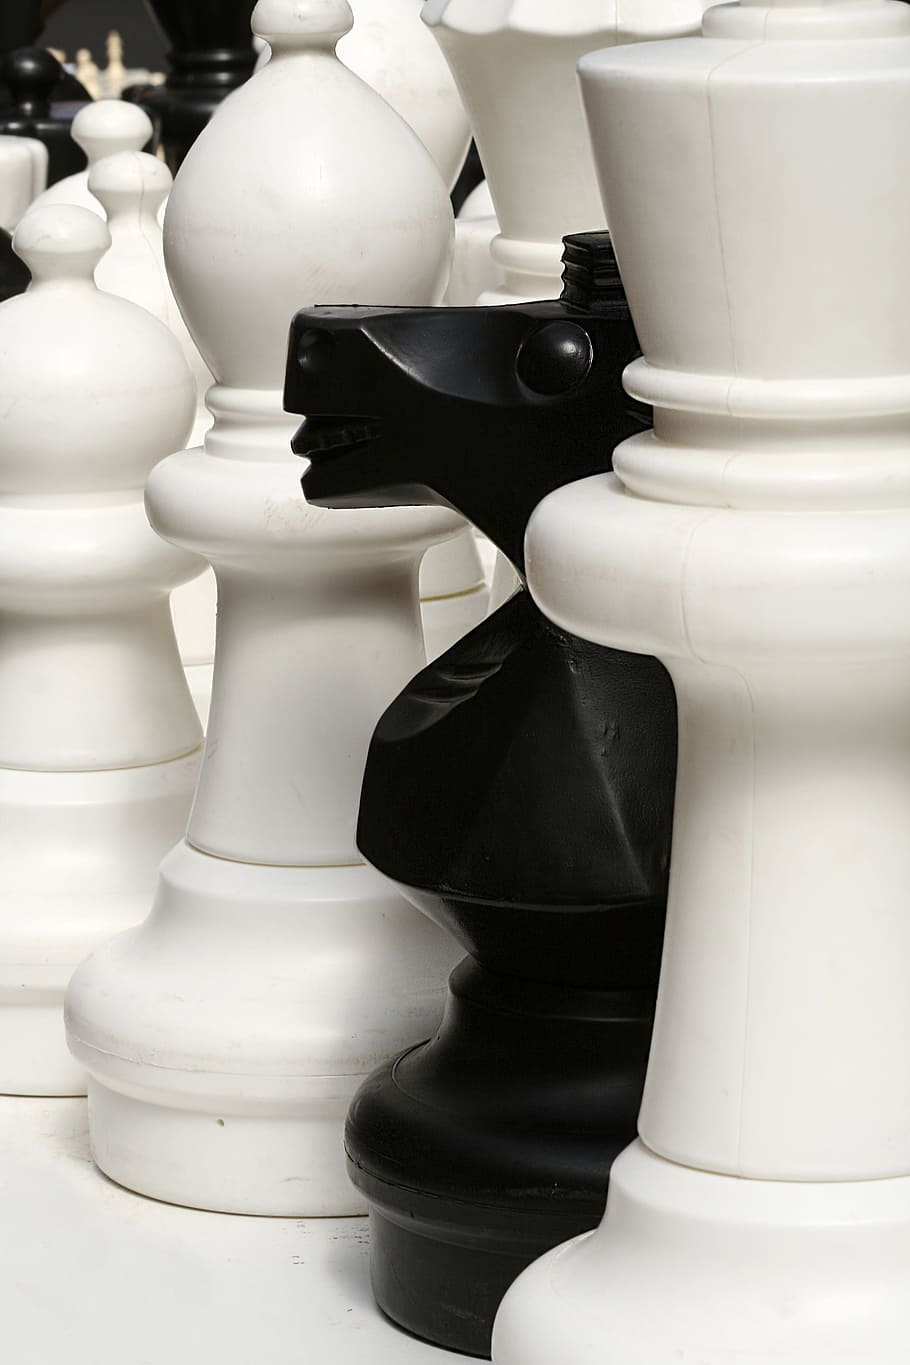 white and black chess pieces, game, board, thinking, play, move